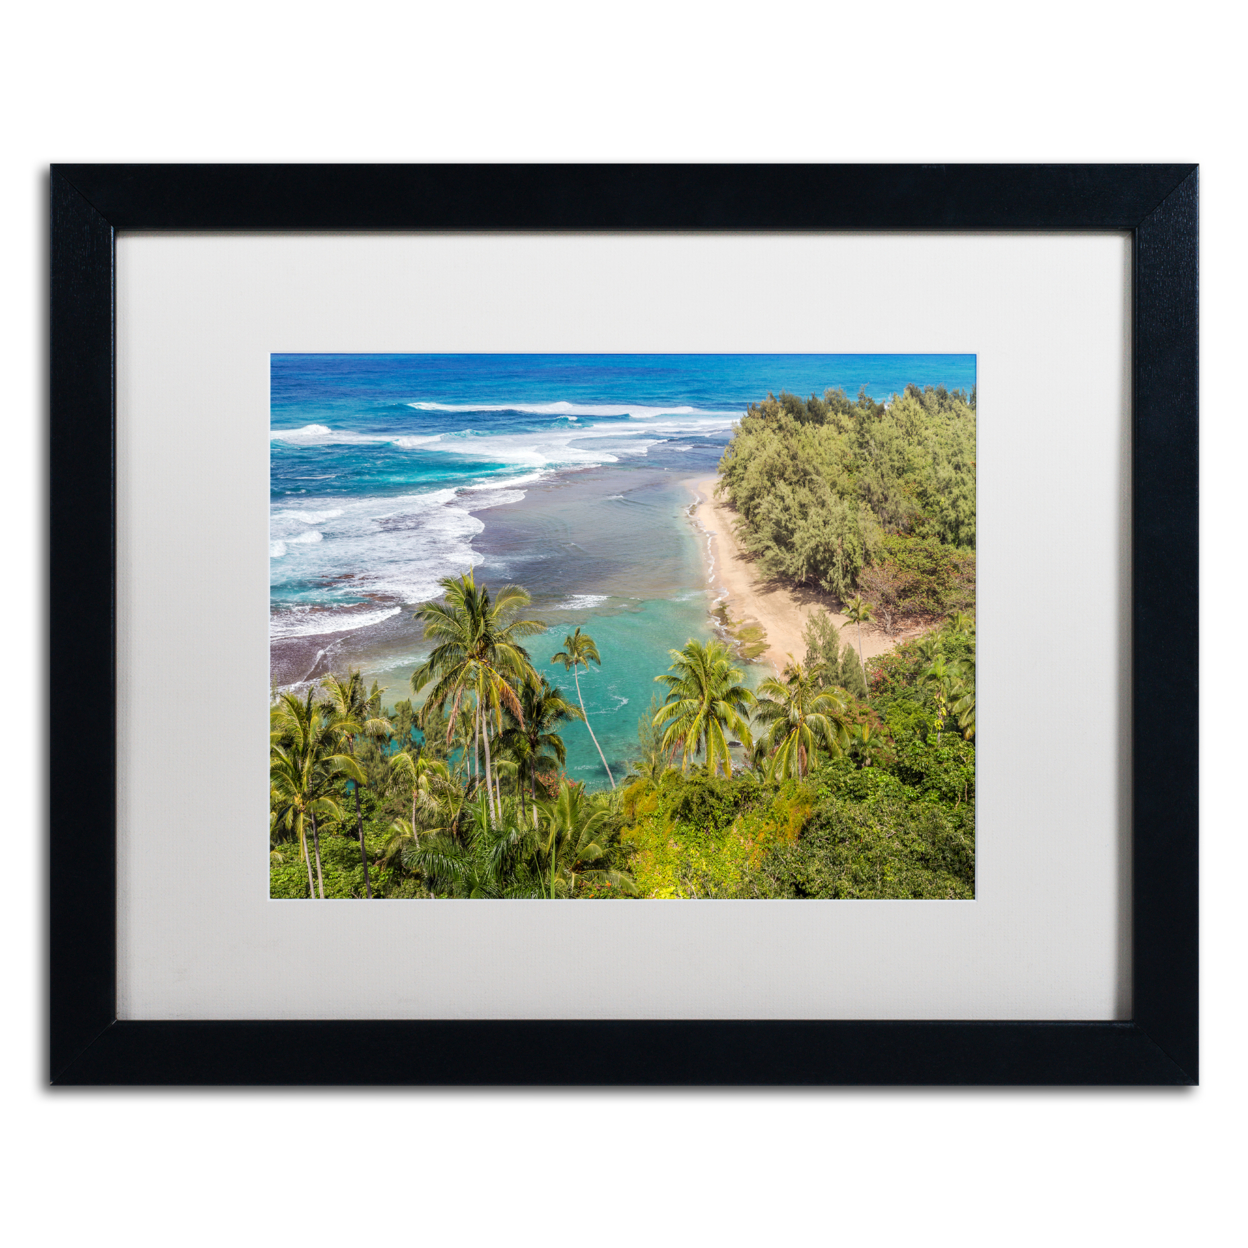 Pierre Leclerc 'Tropical Paradise' Black Wooden Framed Art 18 X 22 Inches